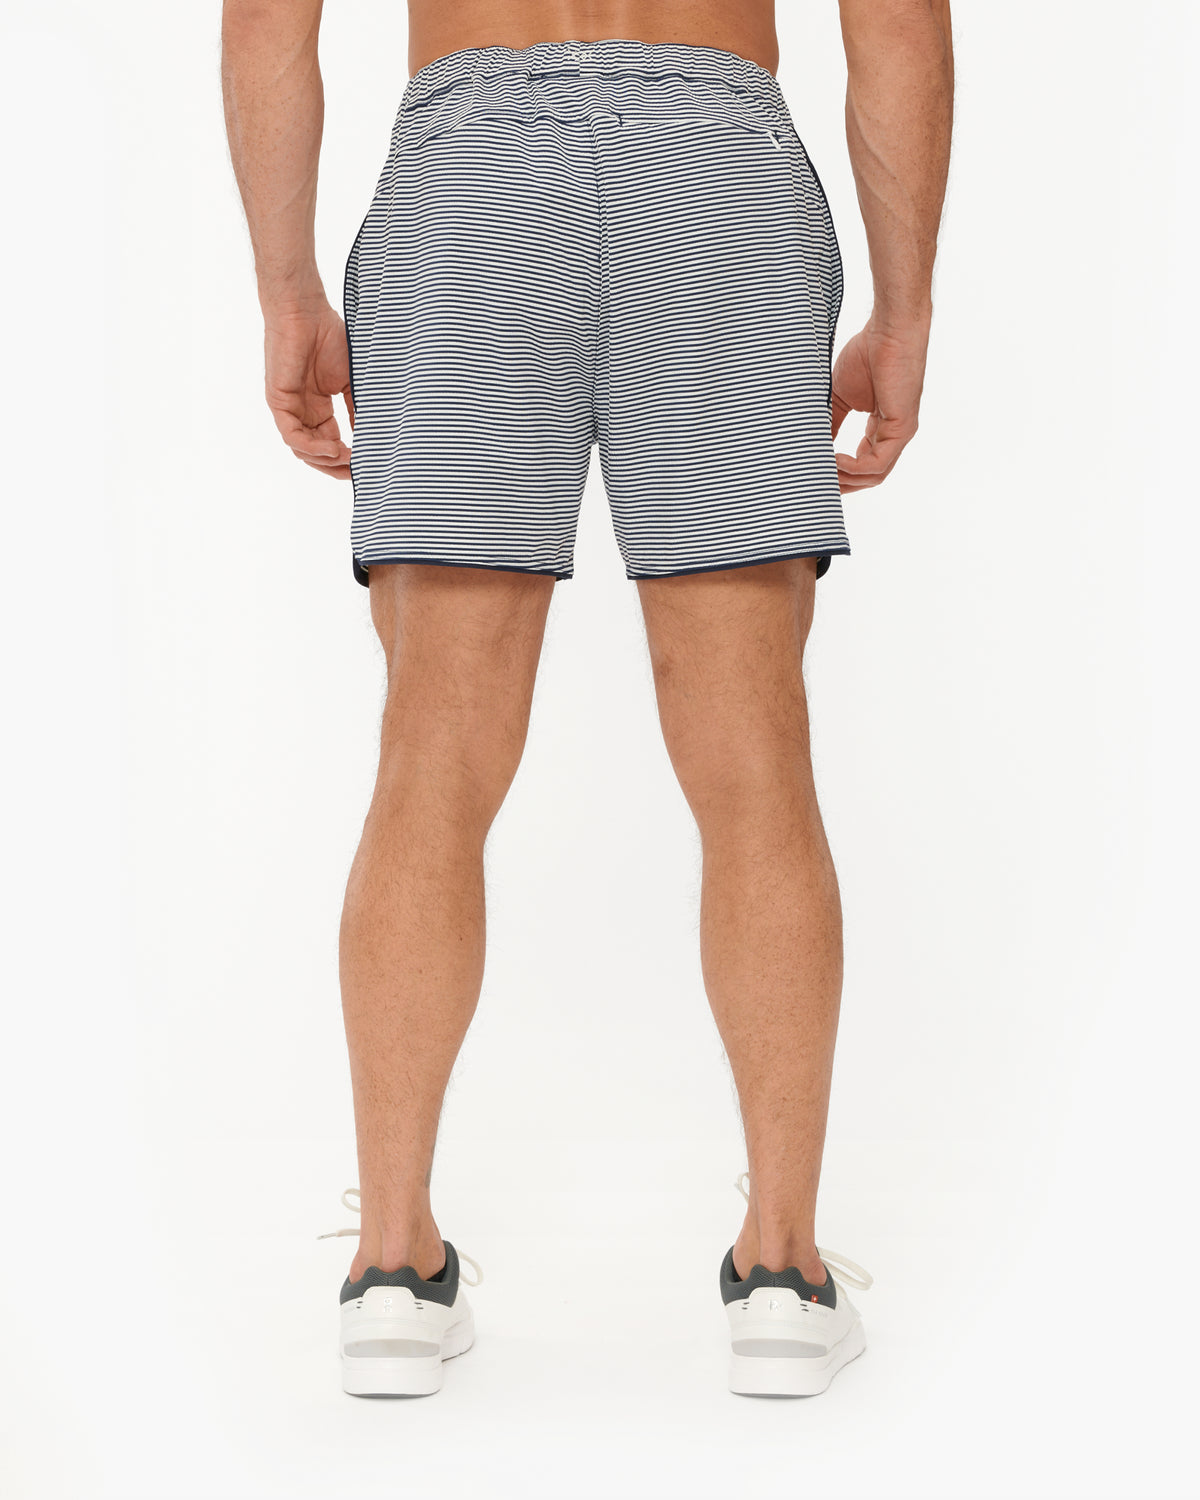 Lululemon Pace Breaker Short 7 - Lined – The Shop at Equinox